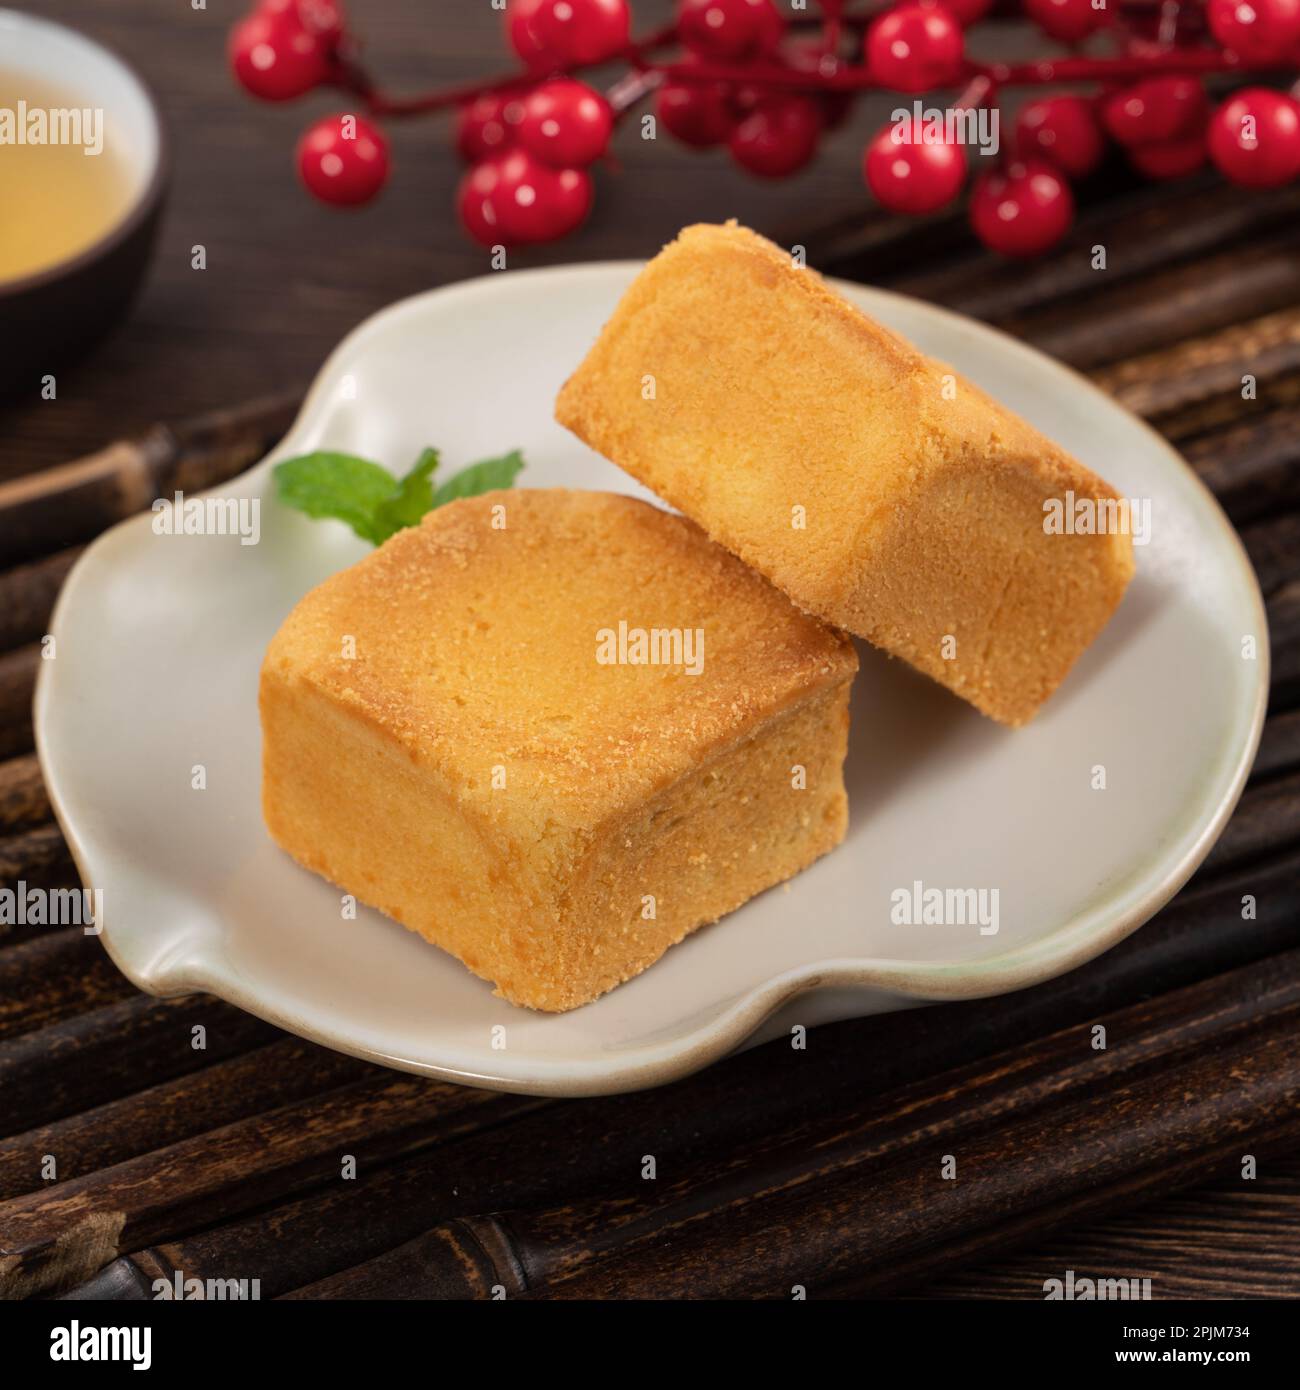 Delicious Taiwanese pineapple cake pastry dessert in a plate on wooden table background with hot tea. Stock Photo